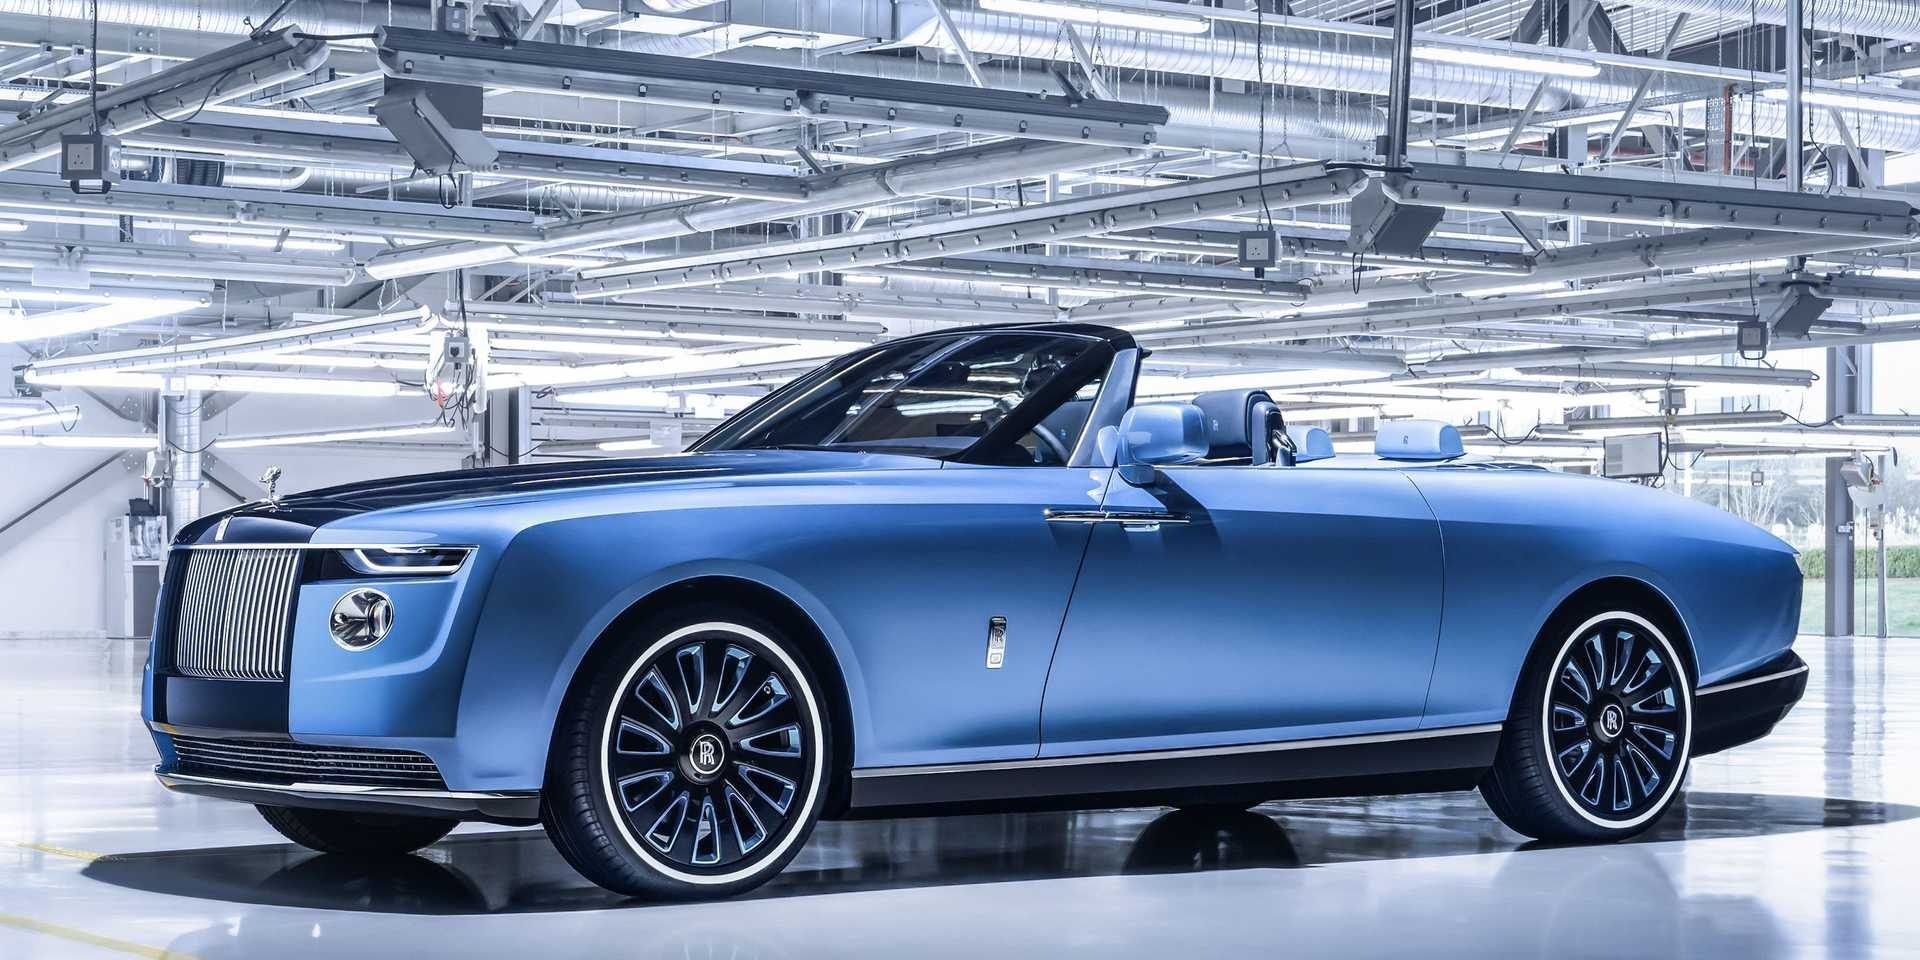 Beyoncé and JayZ May Have Commissioned 28 Million Car That RollsRoyce  CEO Calls Its Most Ambitious Project Yet  Complex